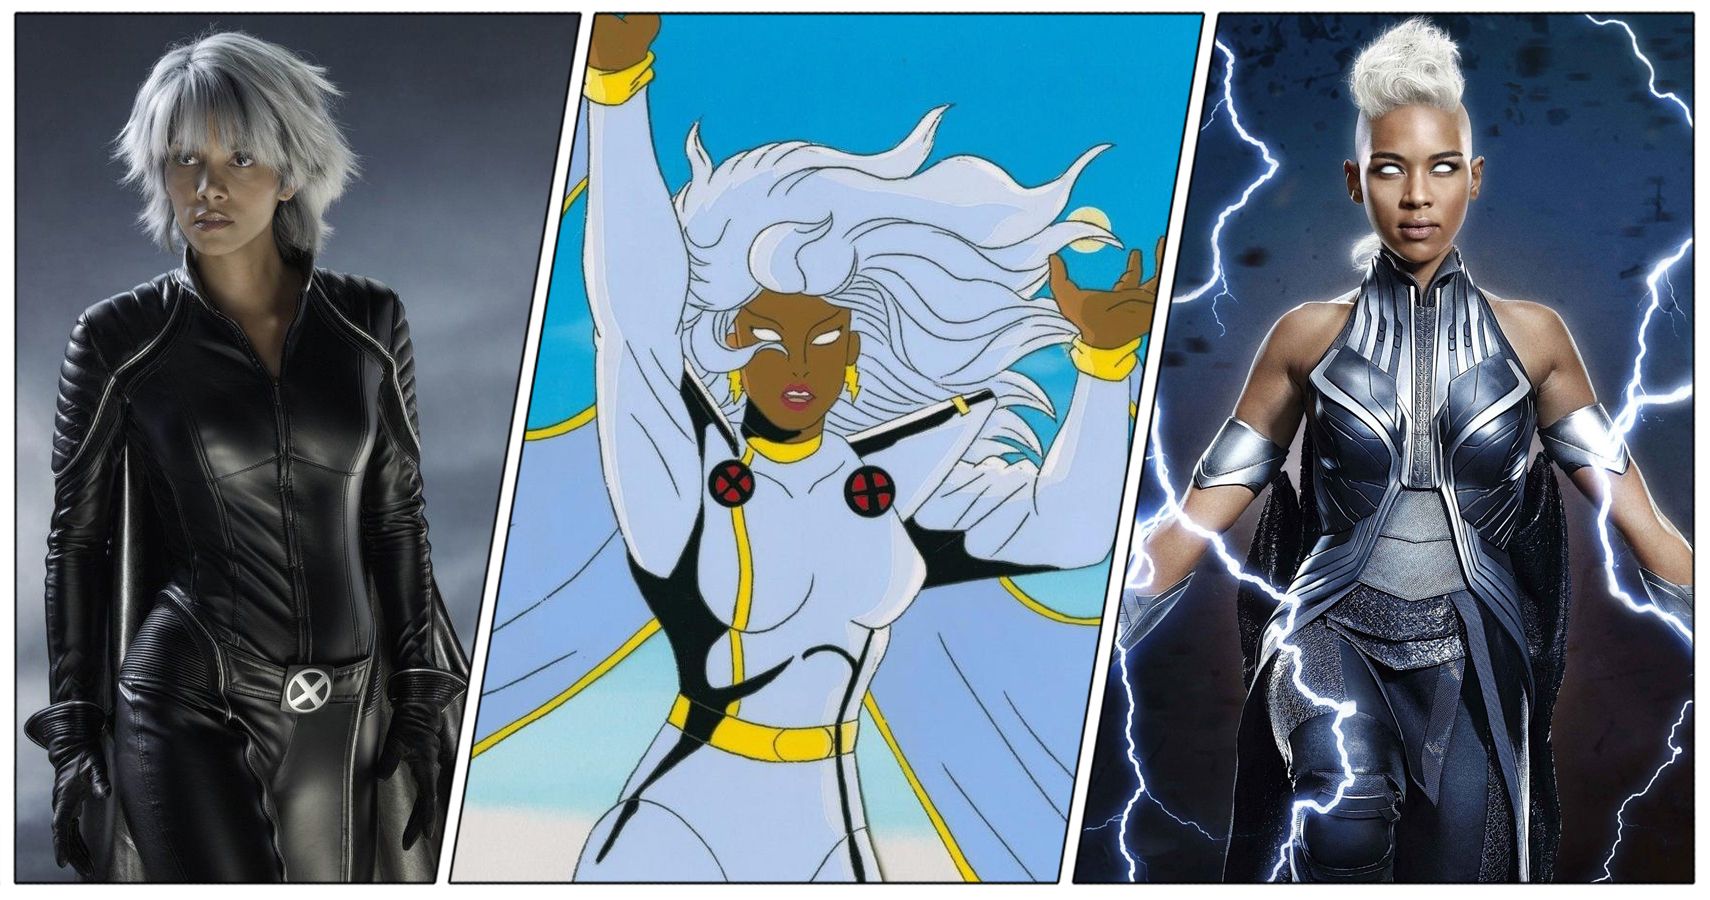 pictures of storm from xmen